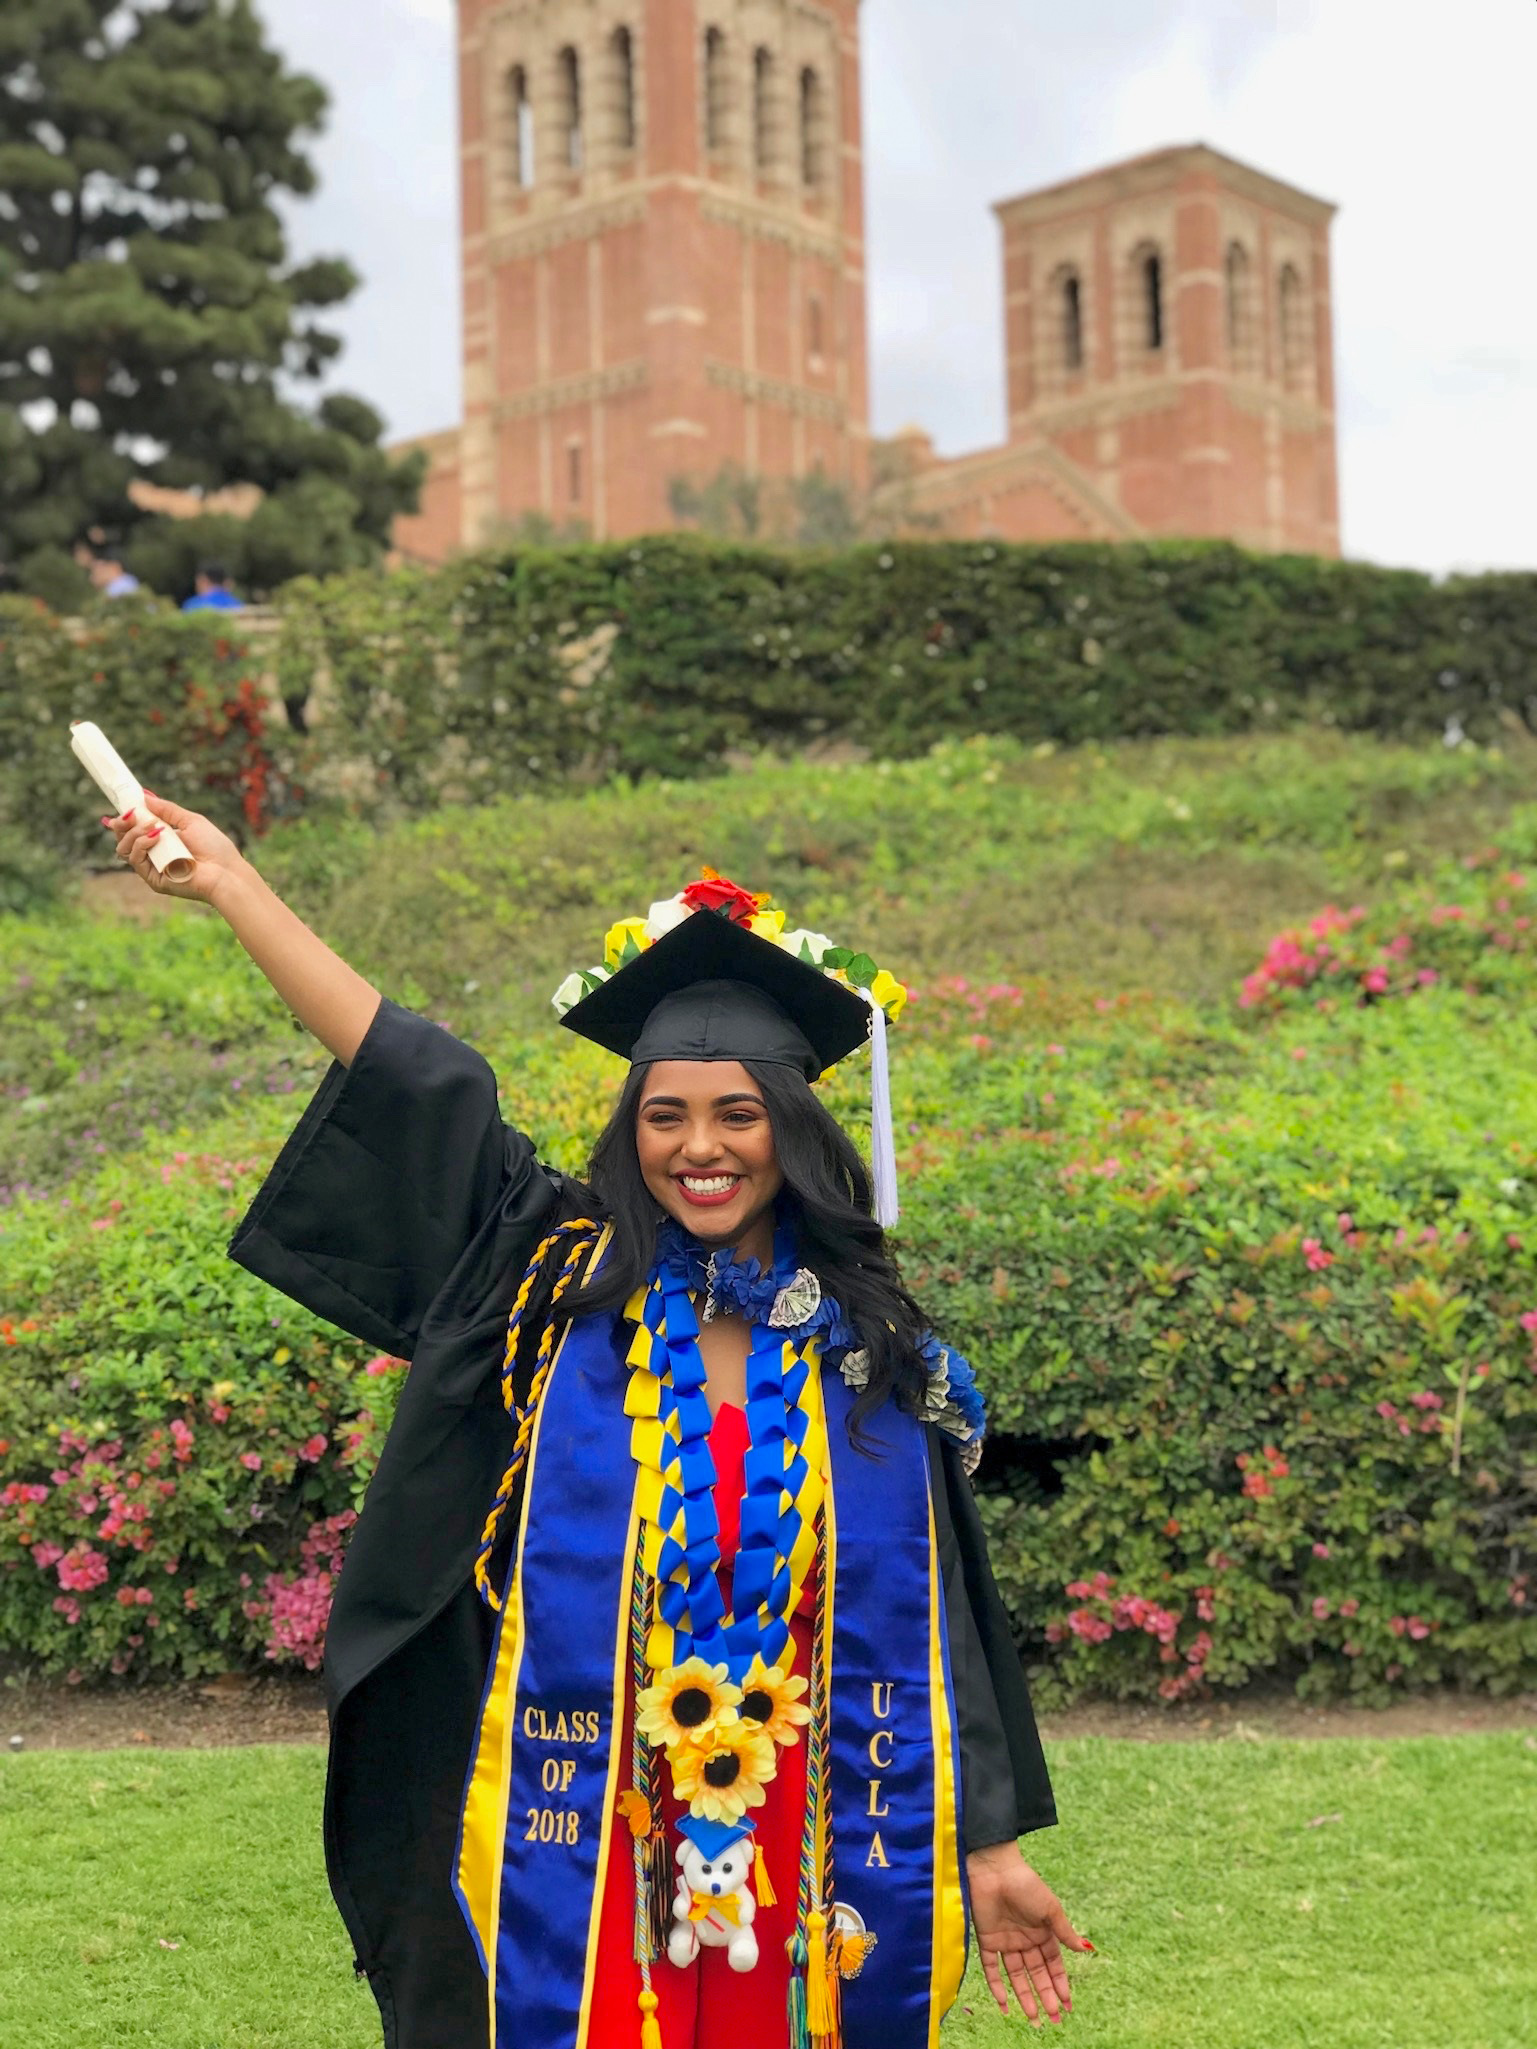 PHOTO: Daysy G. Palma graduated from the University of California, Los Angeles, in June 2018.